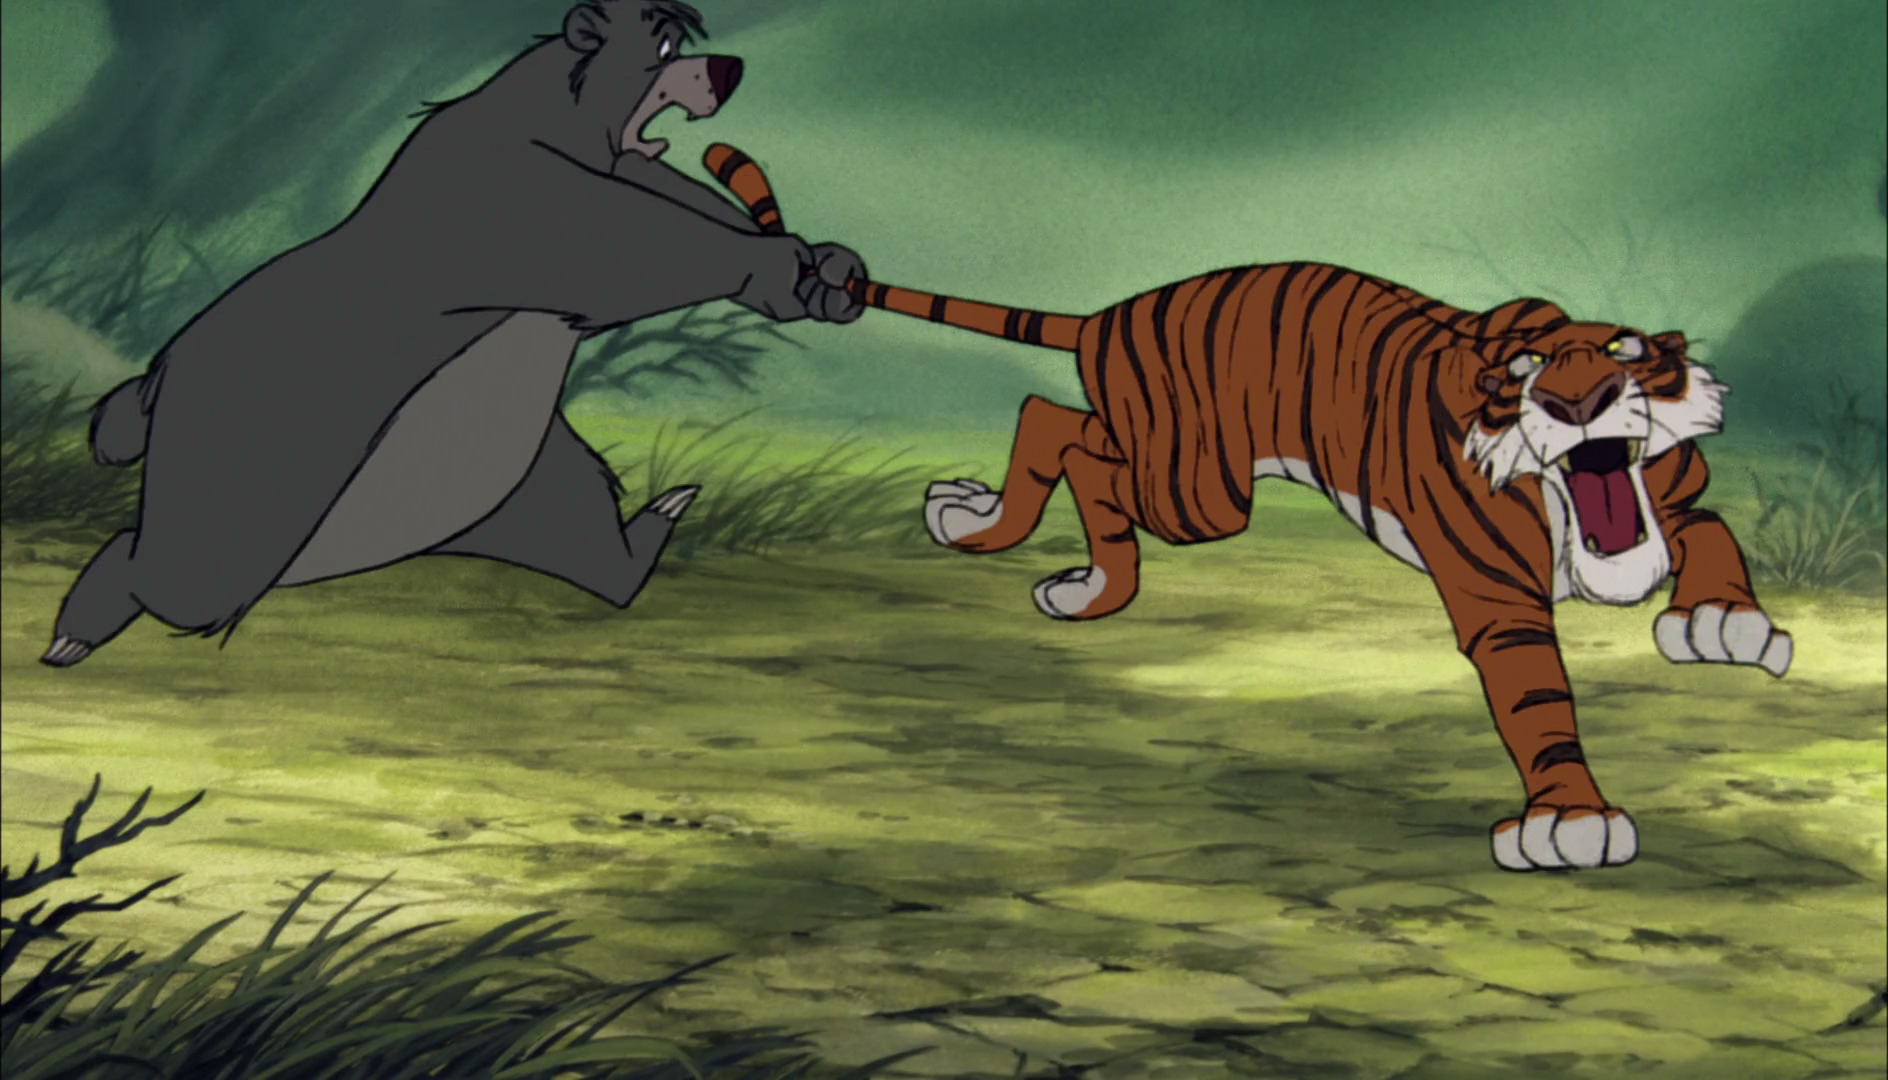 Baloo the Bear is still holding onto Shere Khan the tiger s tail